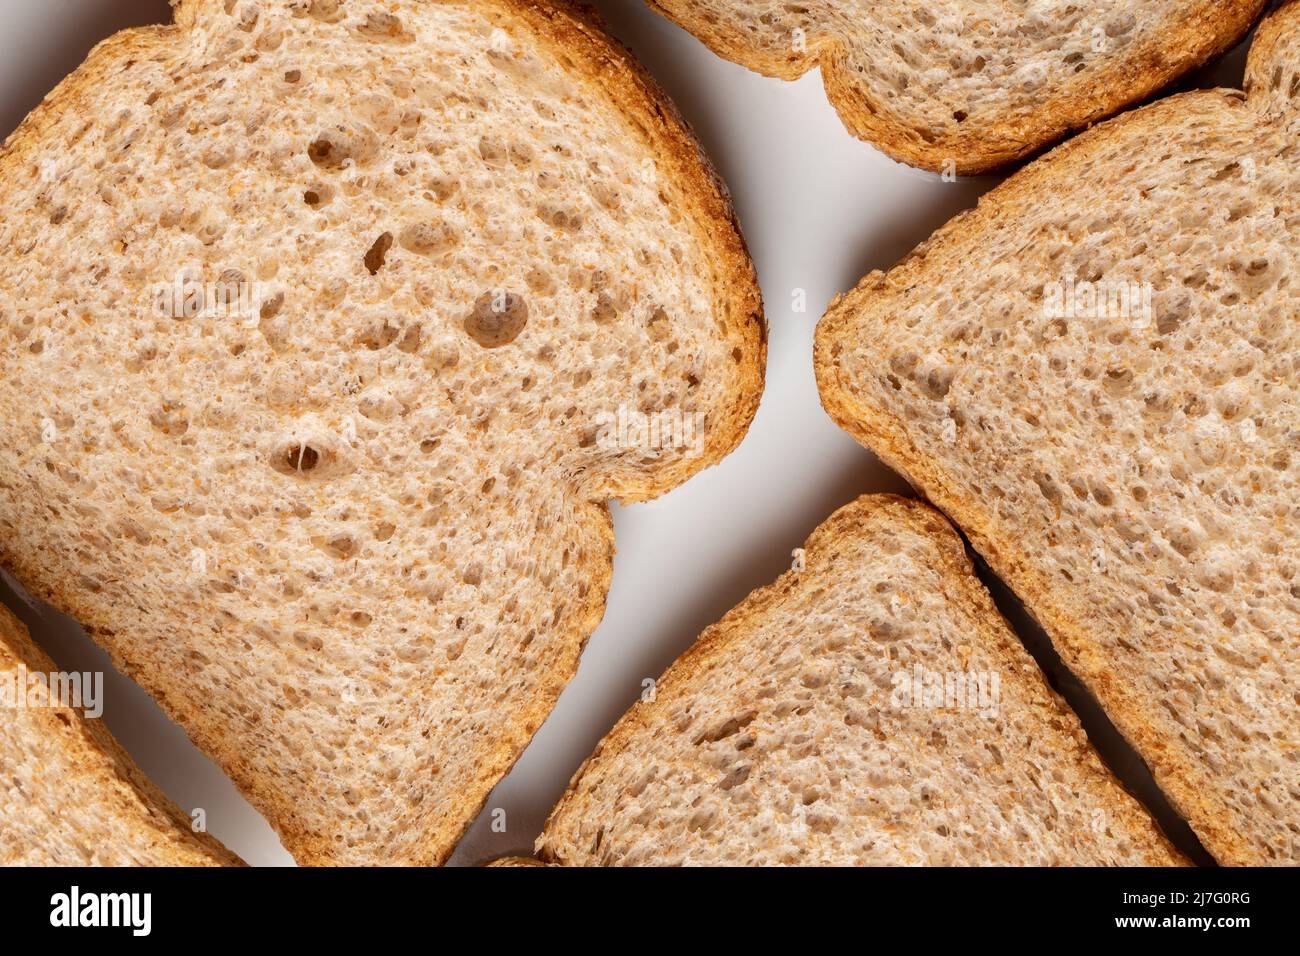 Slices of brown bread baked from wheat flour on a white plate. Stock Photo